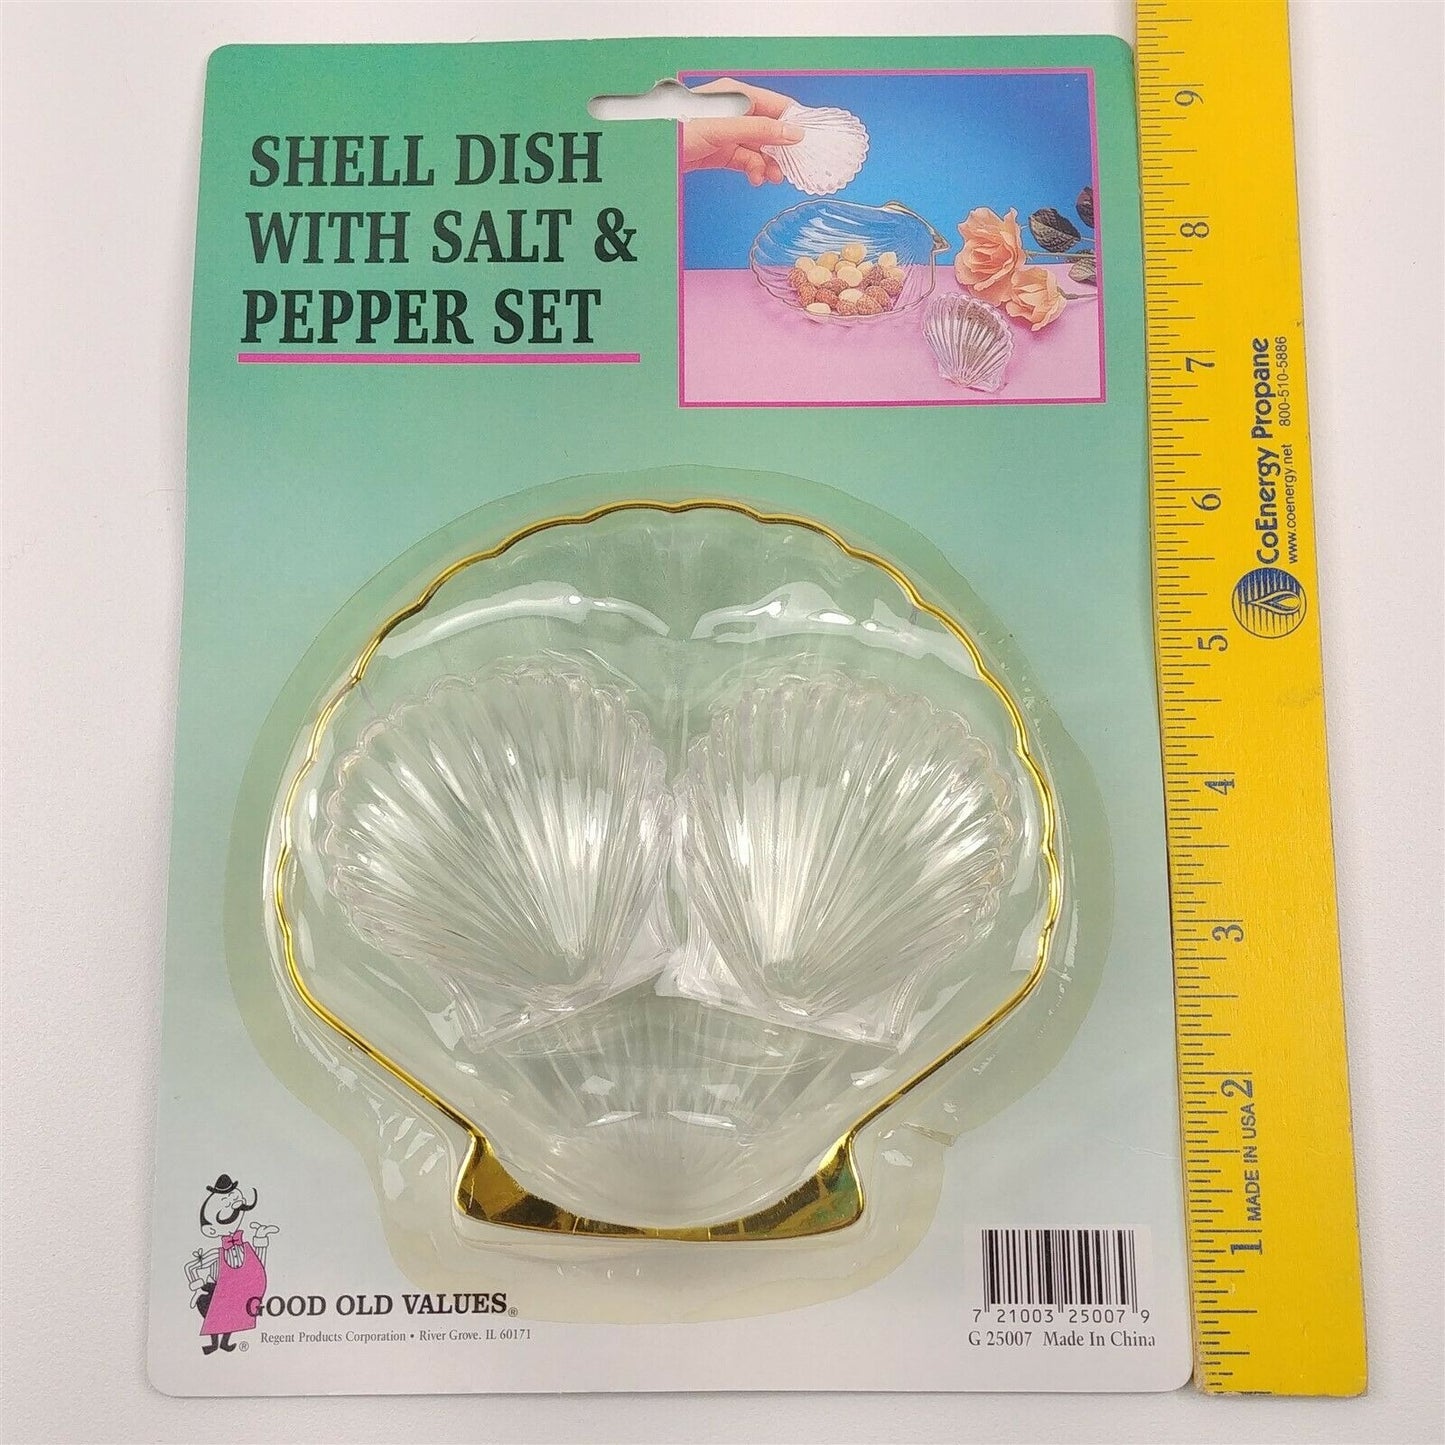 Plastic Sea Shell Salt & Pepper Shakers w/ Shell Dish in Packaging